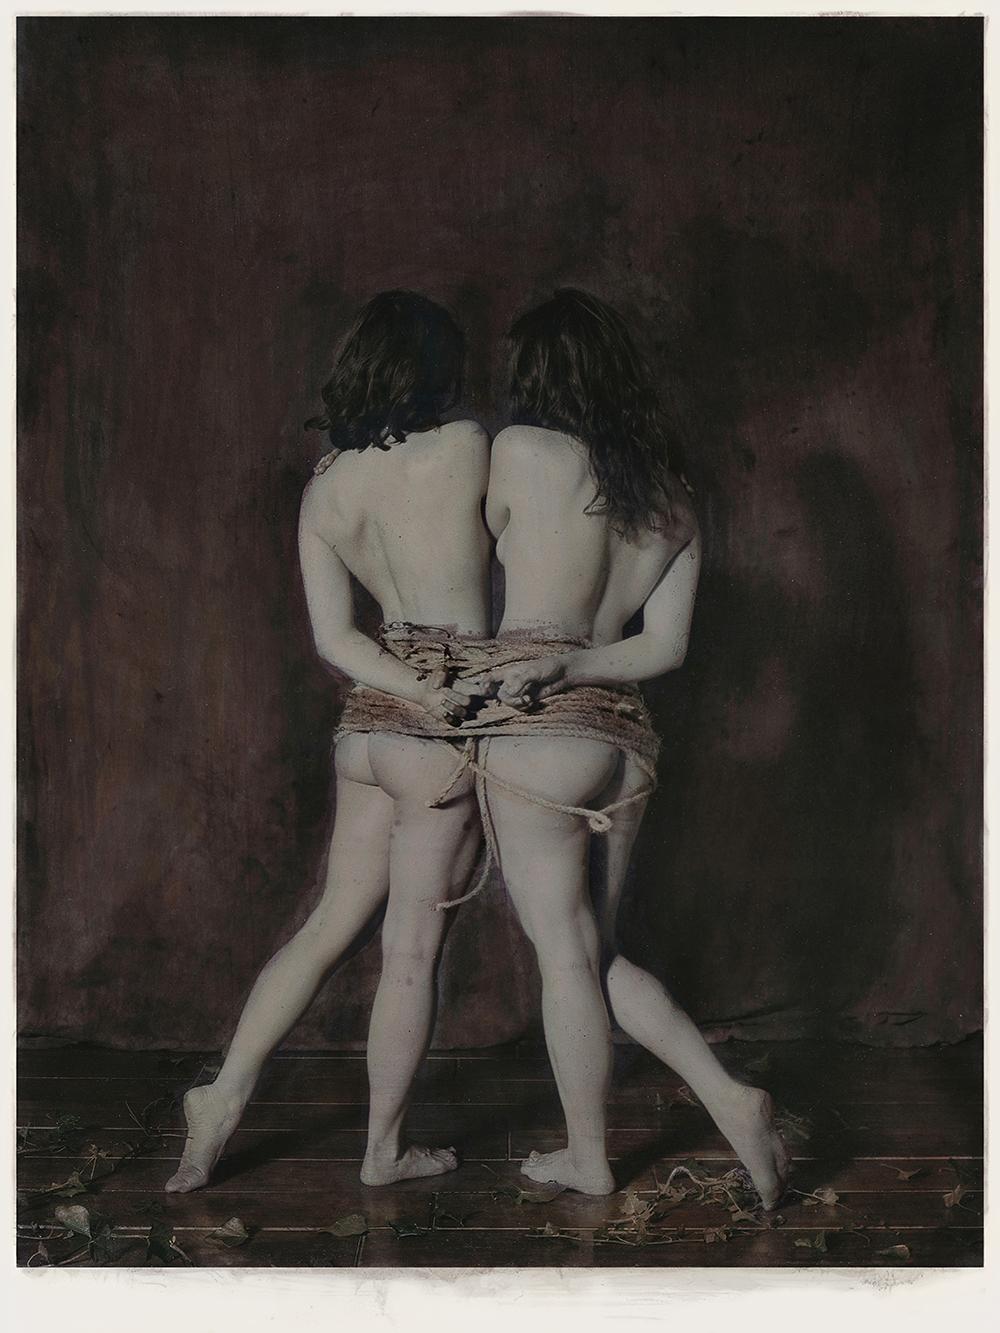 Katie Eleanor Nude Photograph - Pigment Print of hand colour photograph depicting nude females tight with rope